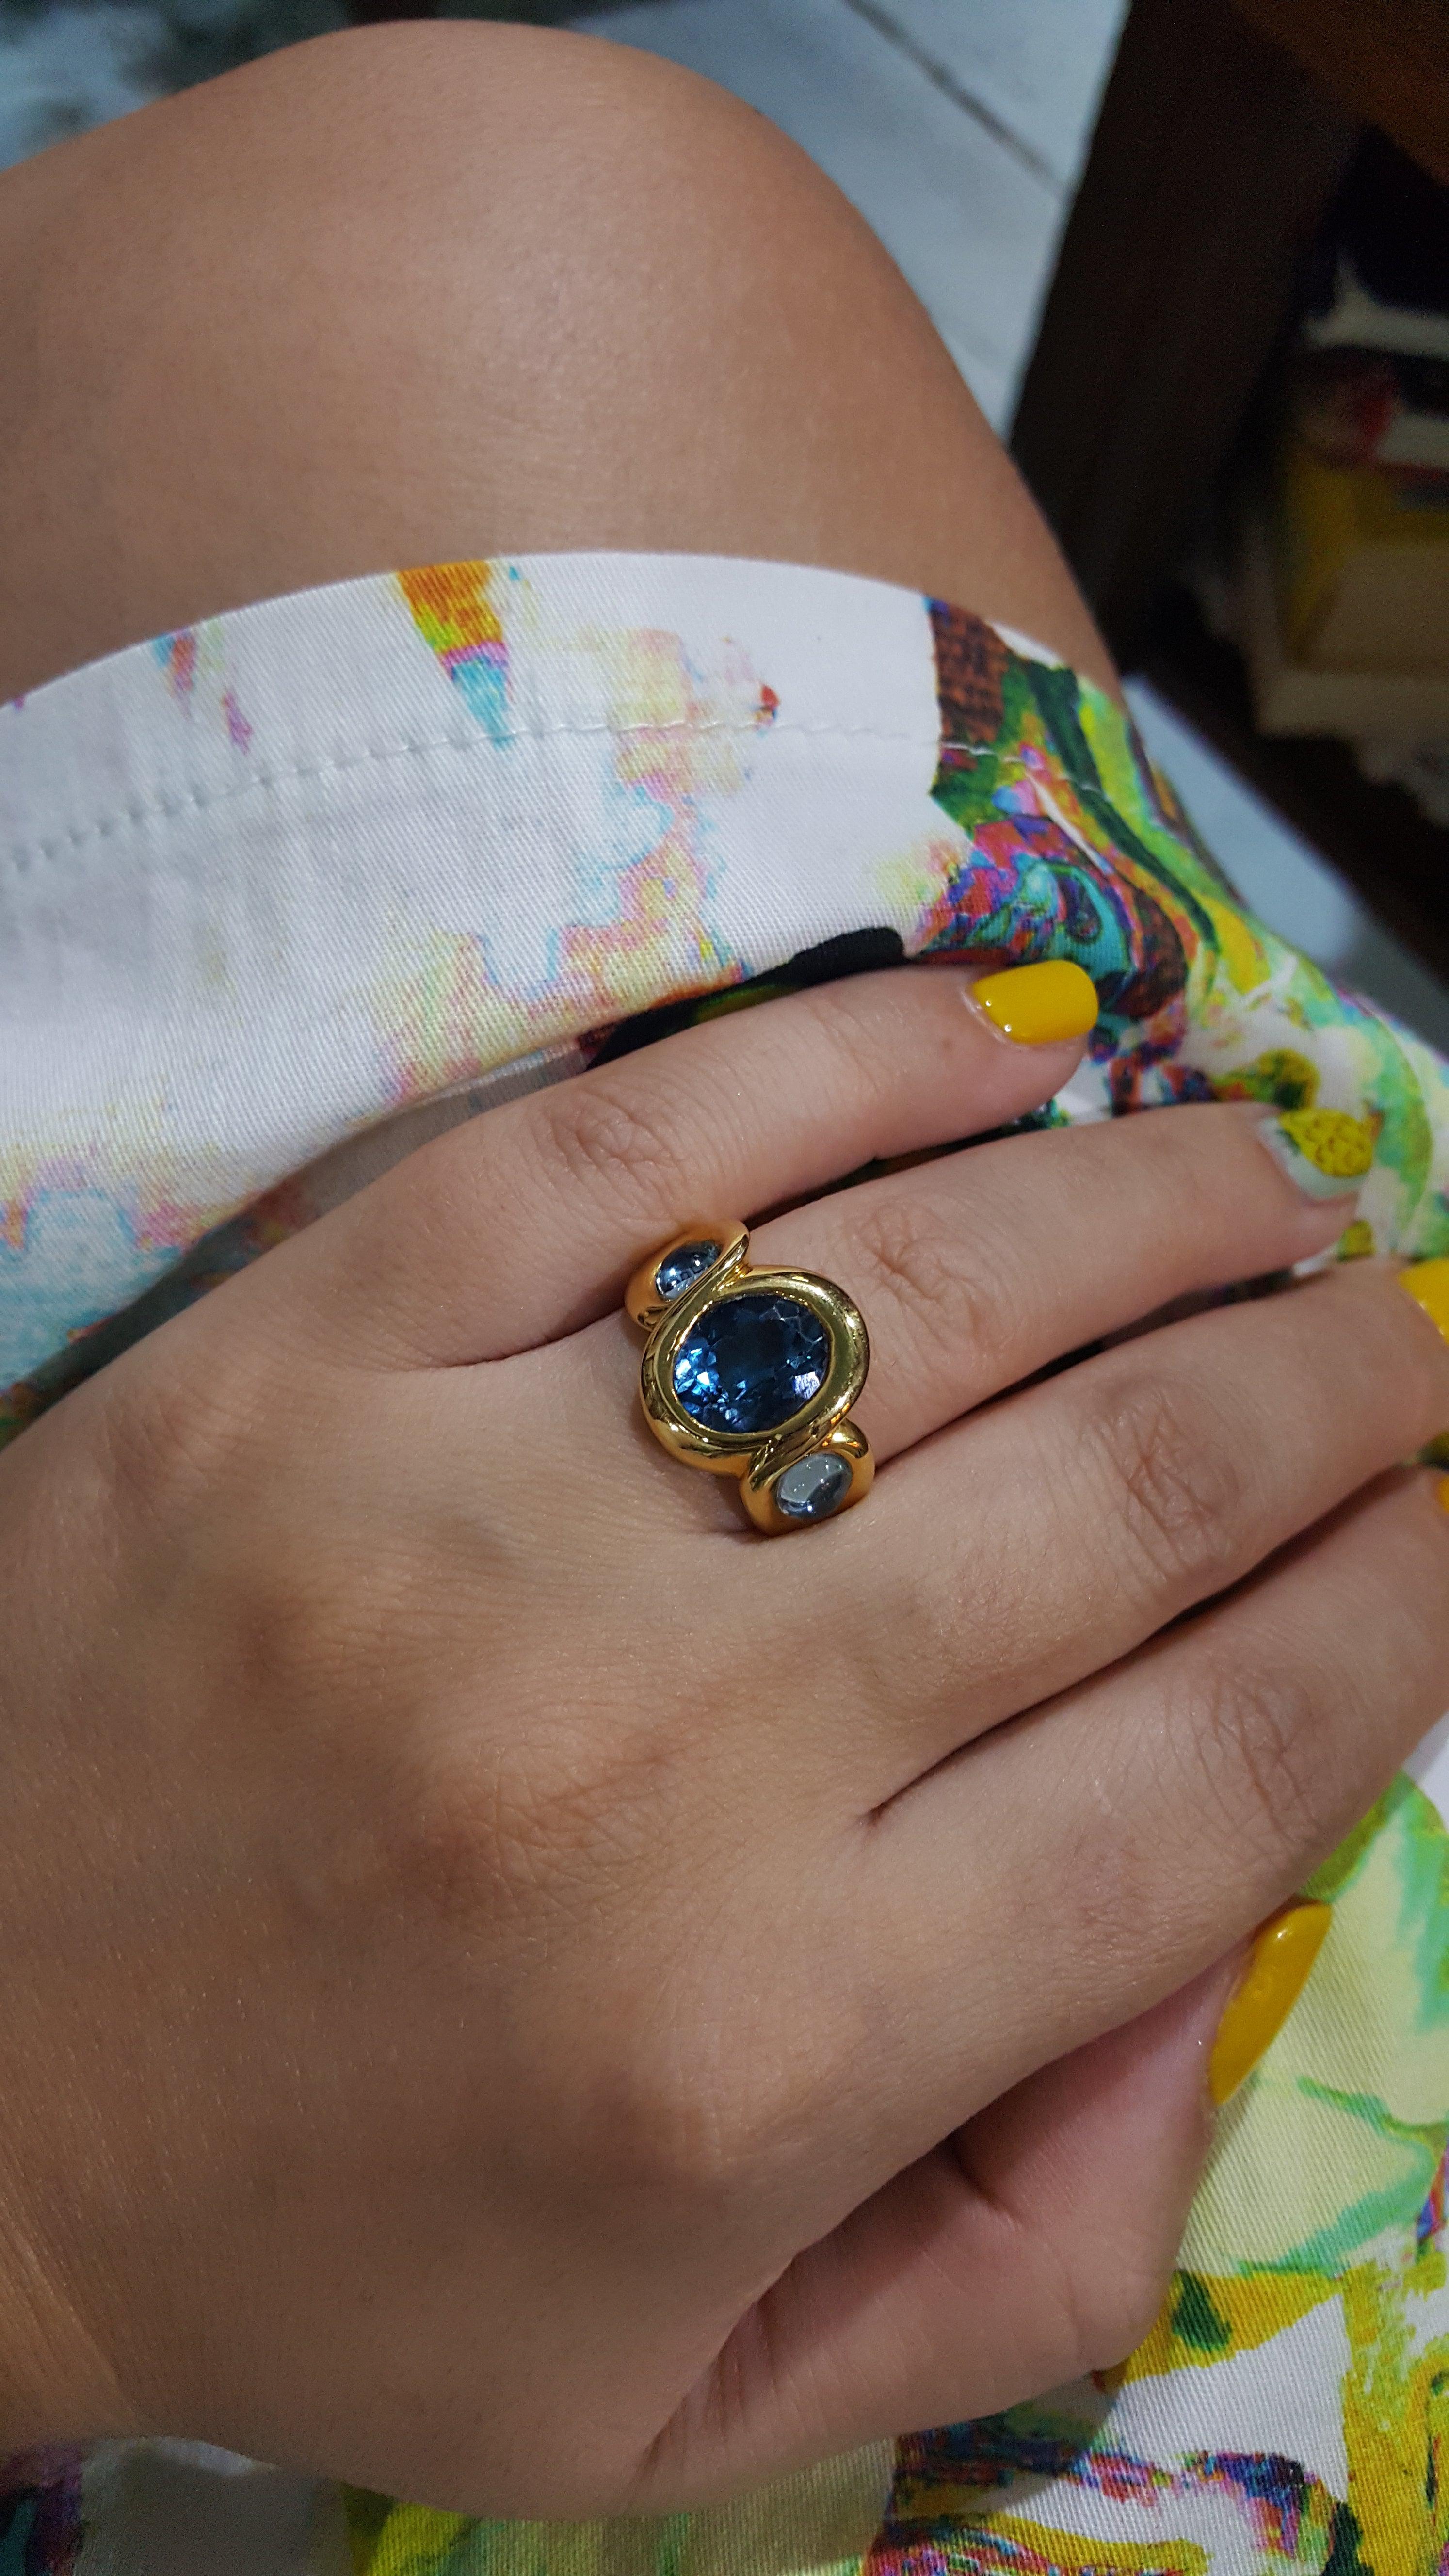 Ring in 18k Gold with a London Blue Topaz & Aquamarine Cabochon